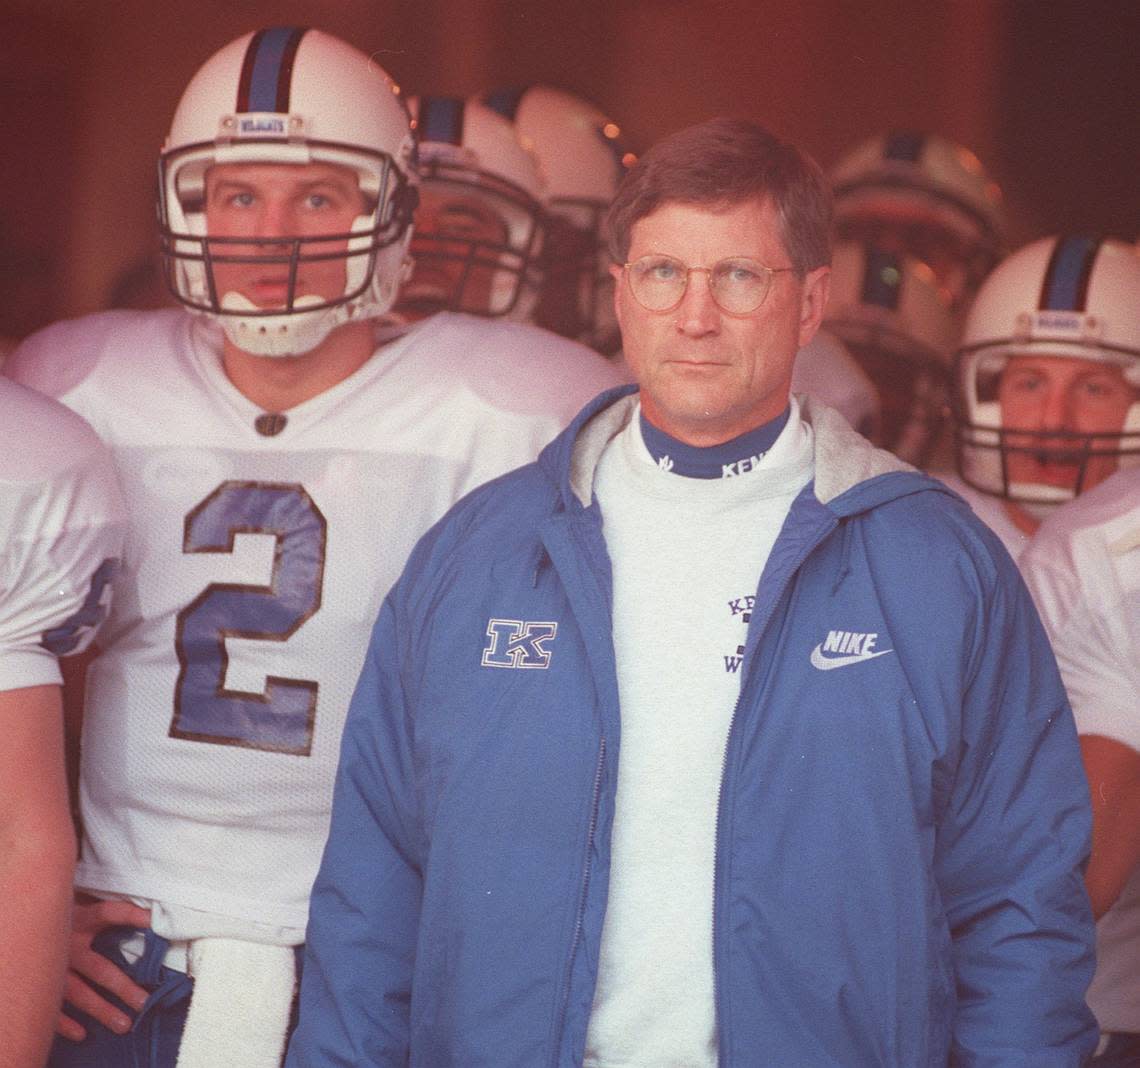 Former UK football coach Bill Curry waits for the end of his last game as the school’s coach, against Tennessee, on Nov. 23, 1996. Behind Curry is freshman quarterback Tim Couch (2).